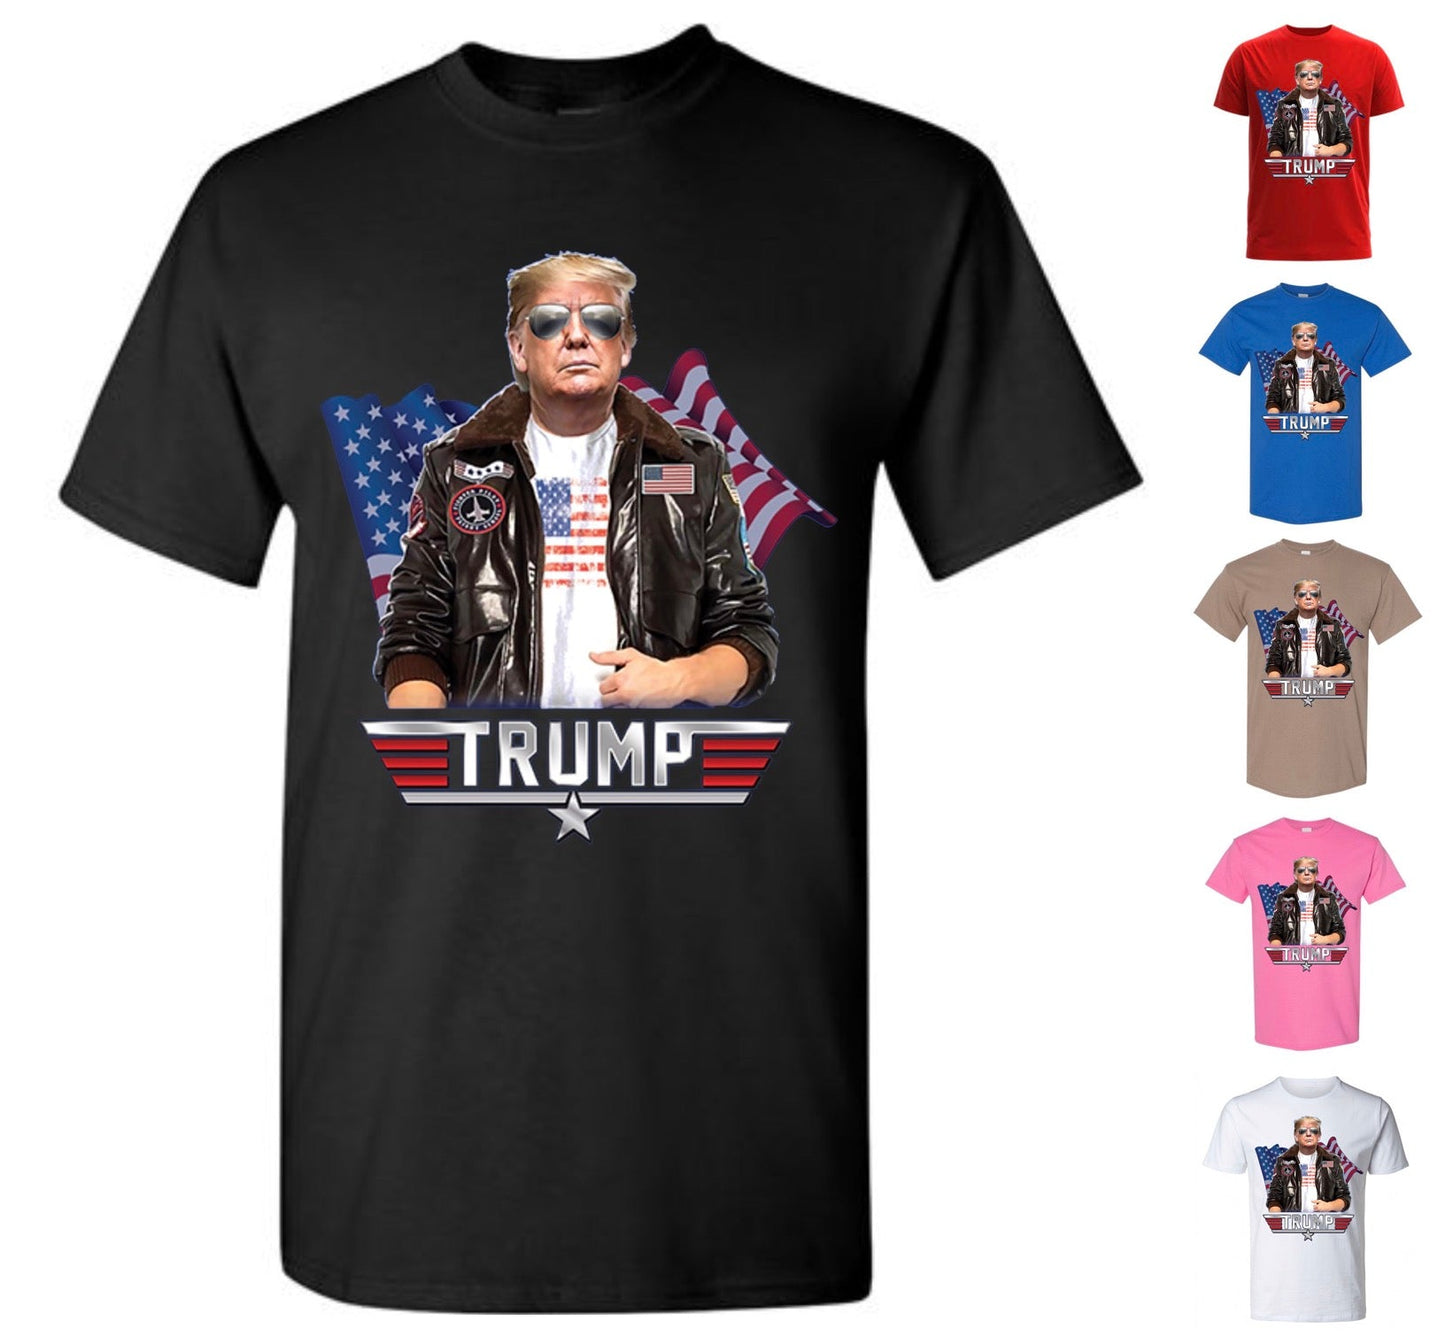 Top Gun Trump — 4th of July Special (FREE Shipping)